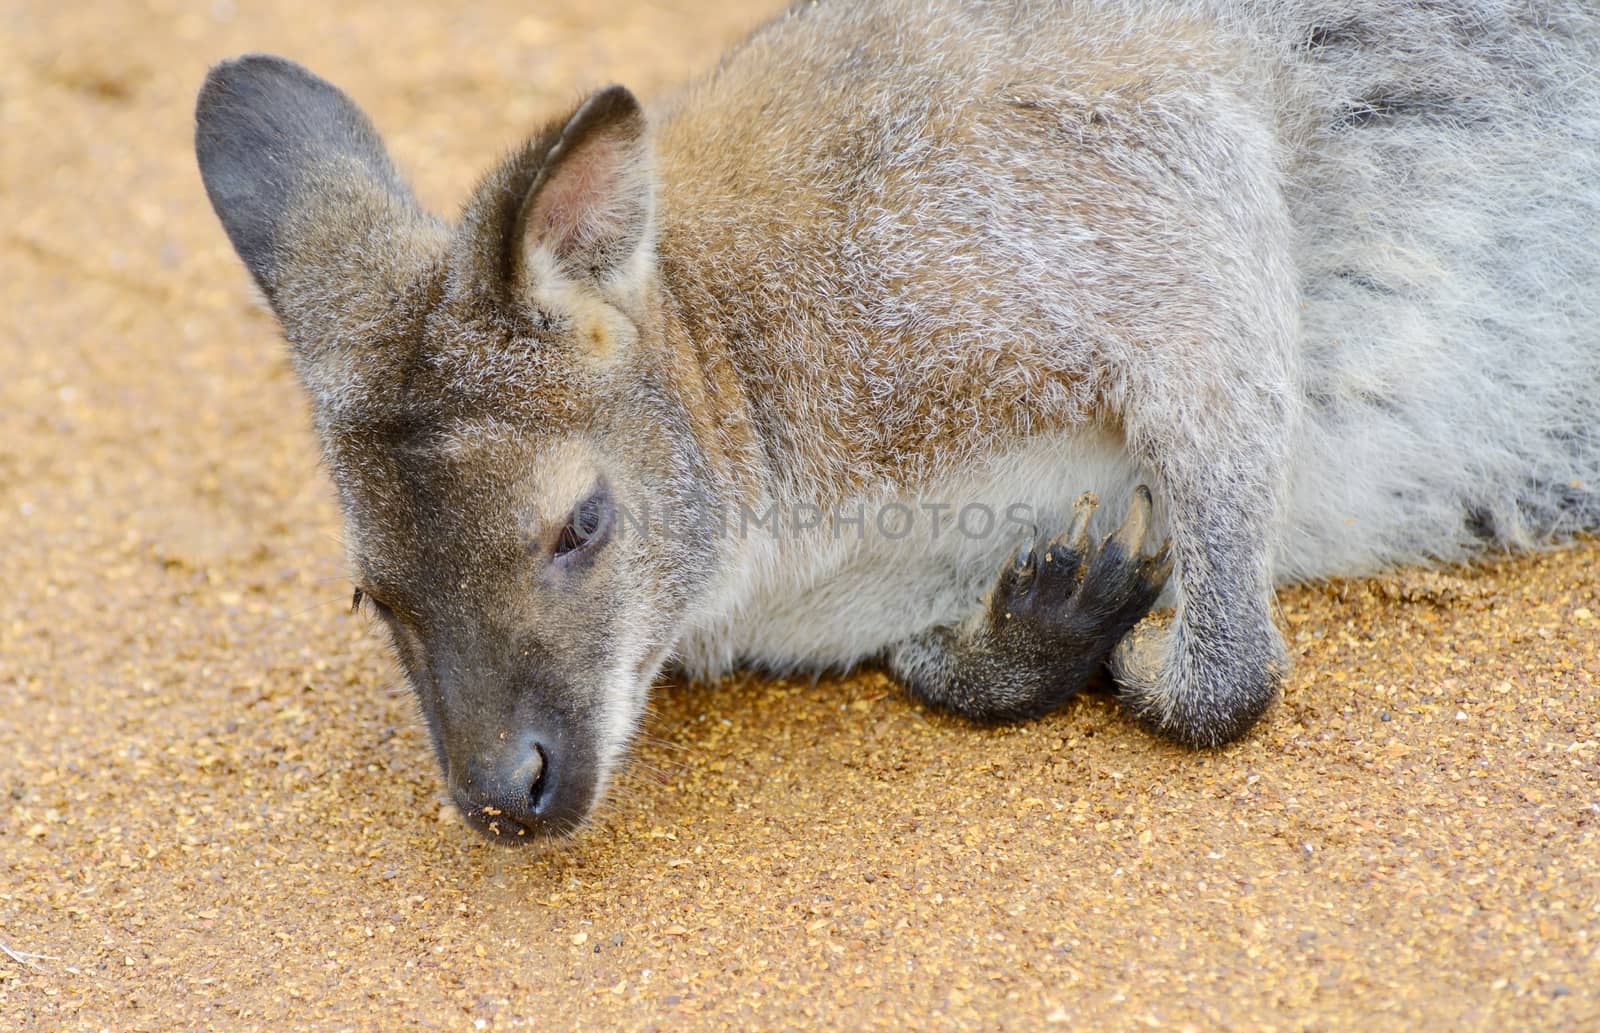 A lone wallaby close-up of head and fur detail 